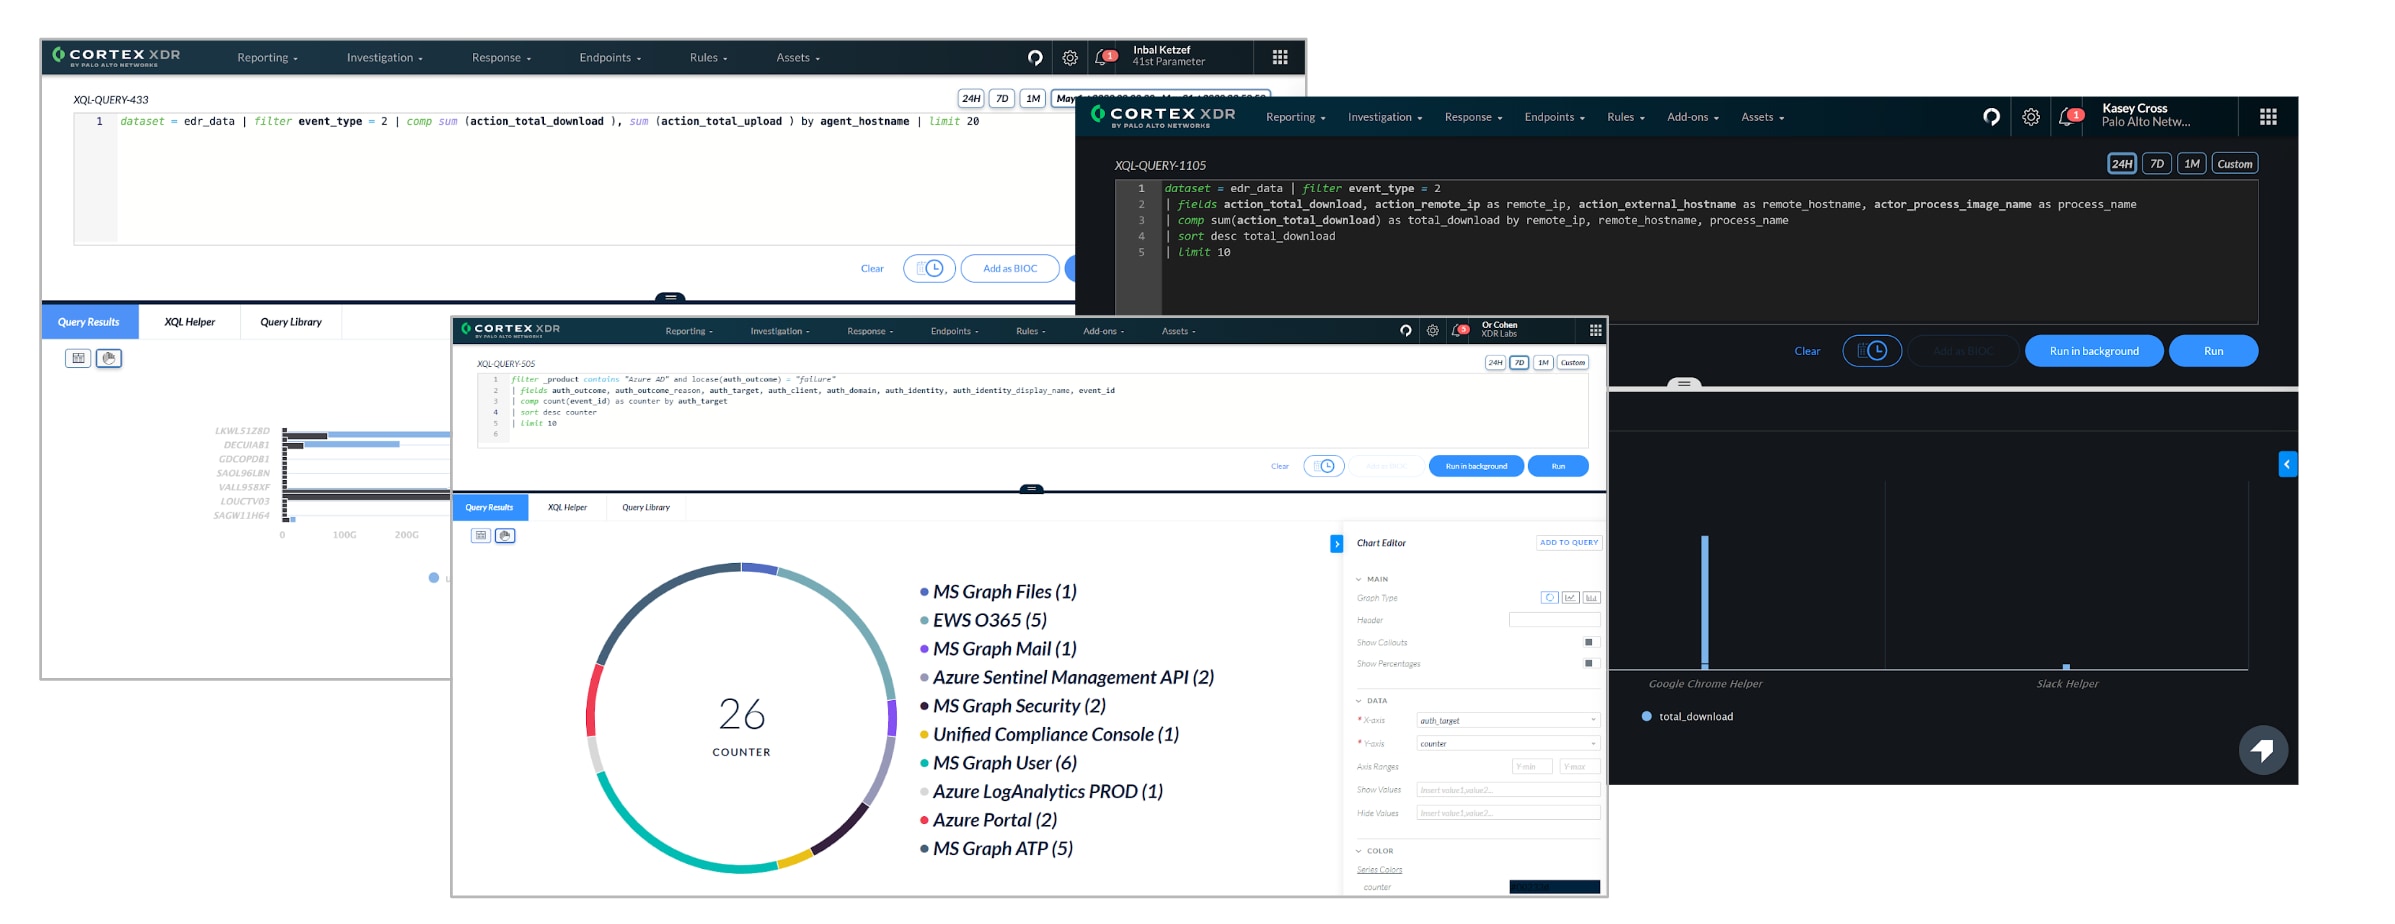 Display your XQL query results as charts or create new query-based widgets in the Cortex XDR dashboard to view graphical representation of your data. 